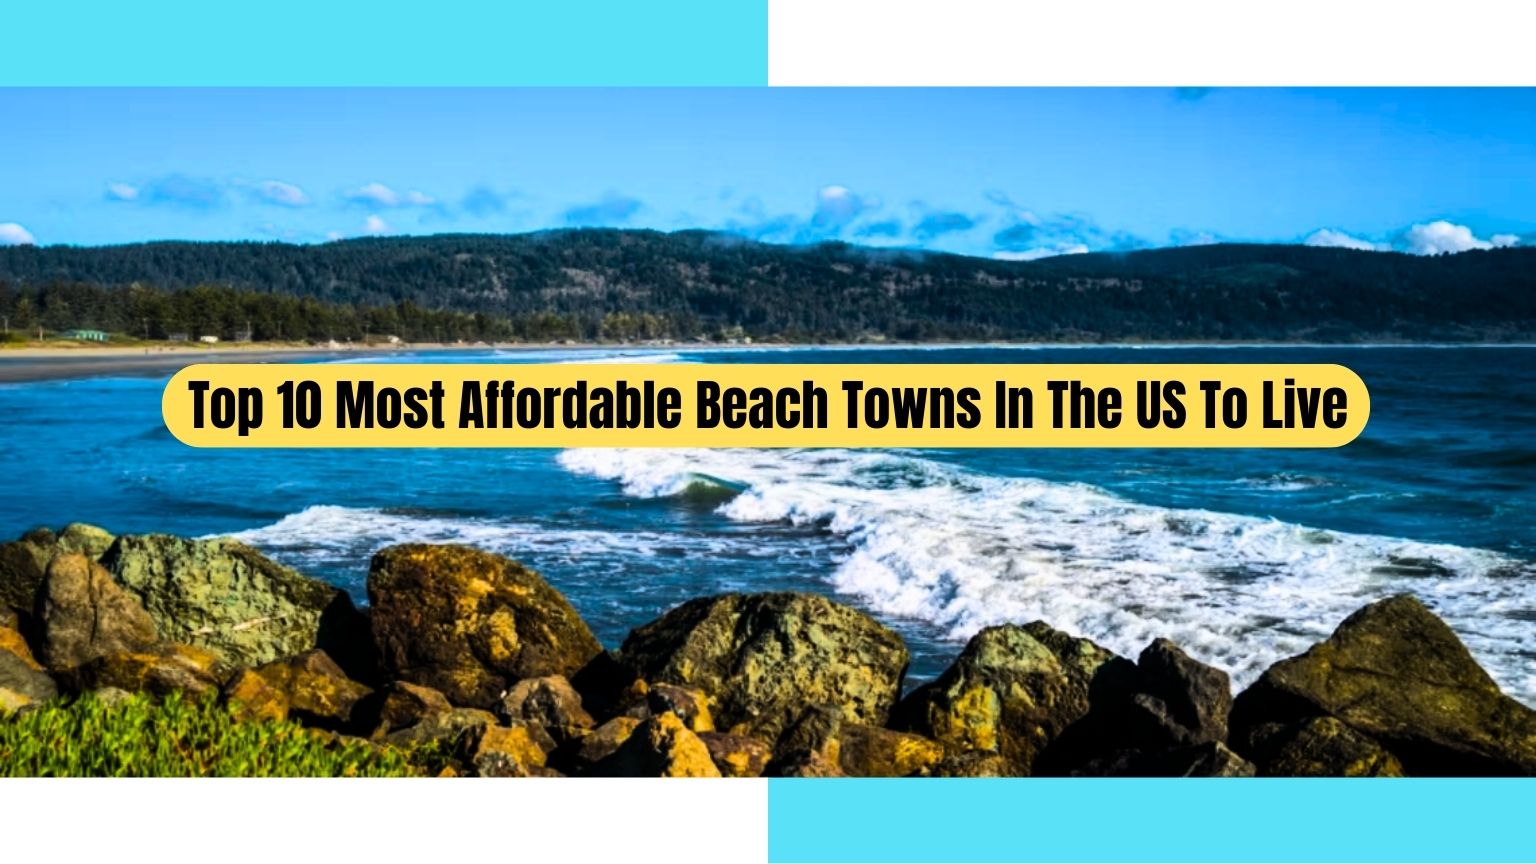 Most affordable beach towns in the us to live, Top 10 most affordable beach towns in the us to live, most affordable beach towns in the us, most affordable beach towns us, most affordable beach towns in the united states, most affordable beach towns united states,